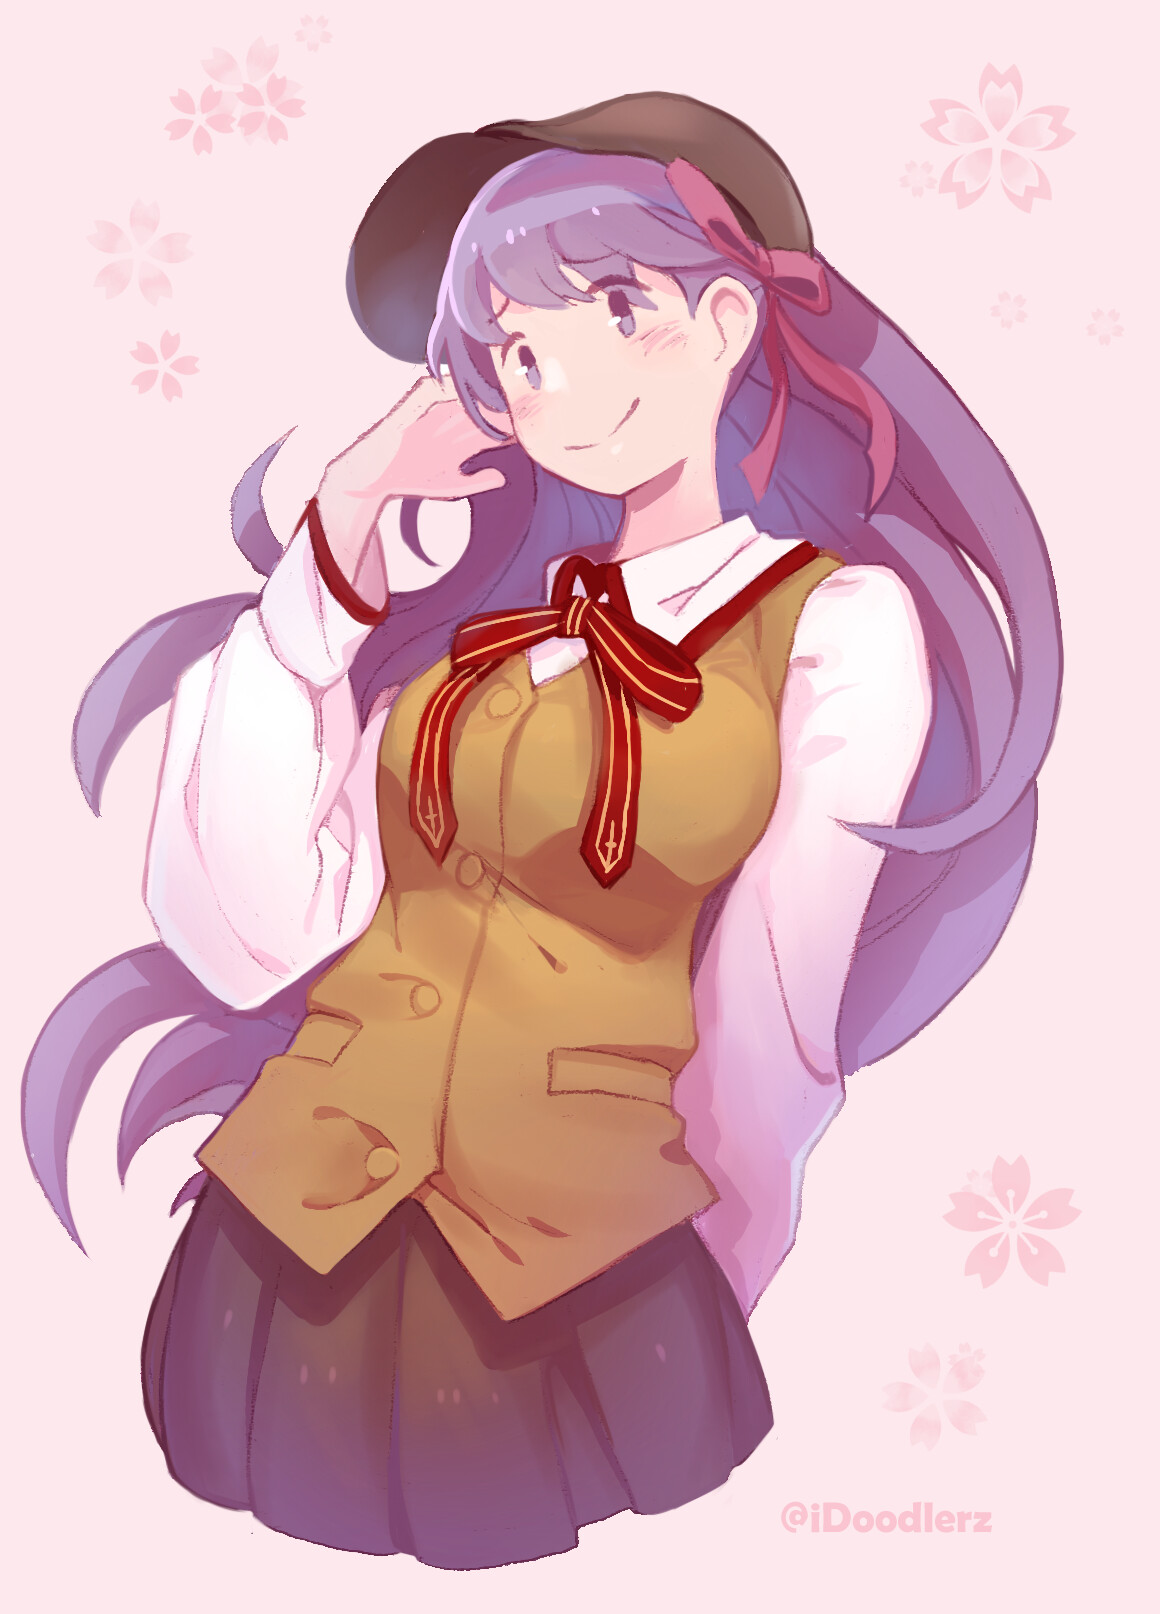 Sakura Matou without her accesory by mawii17 on DeviantArt